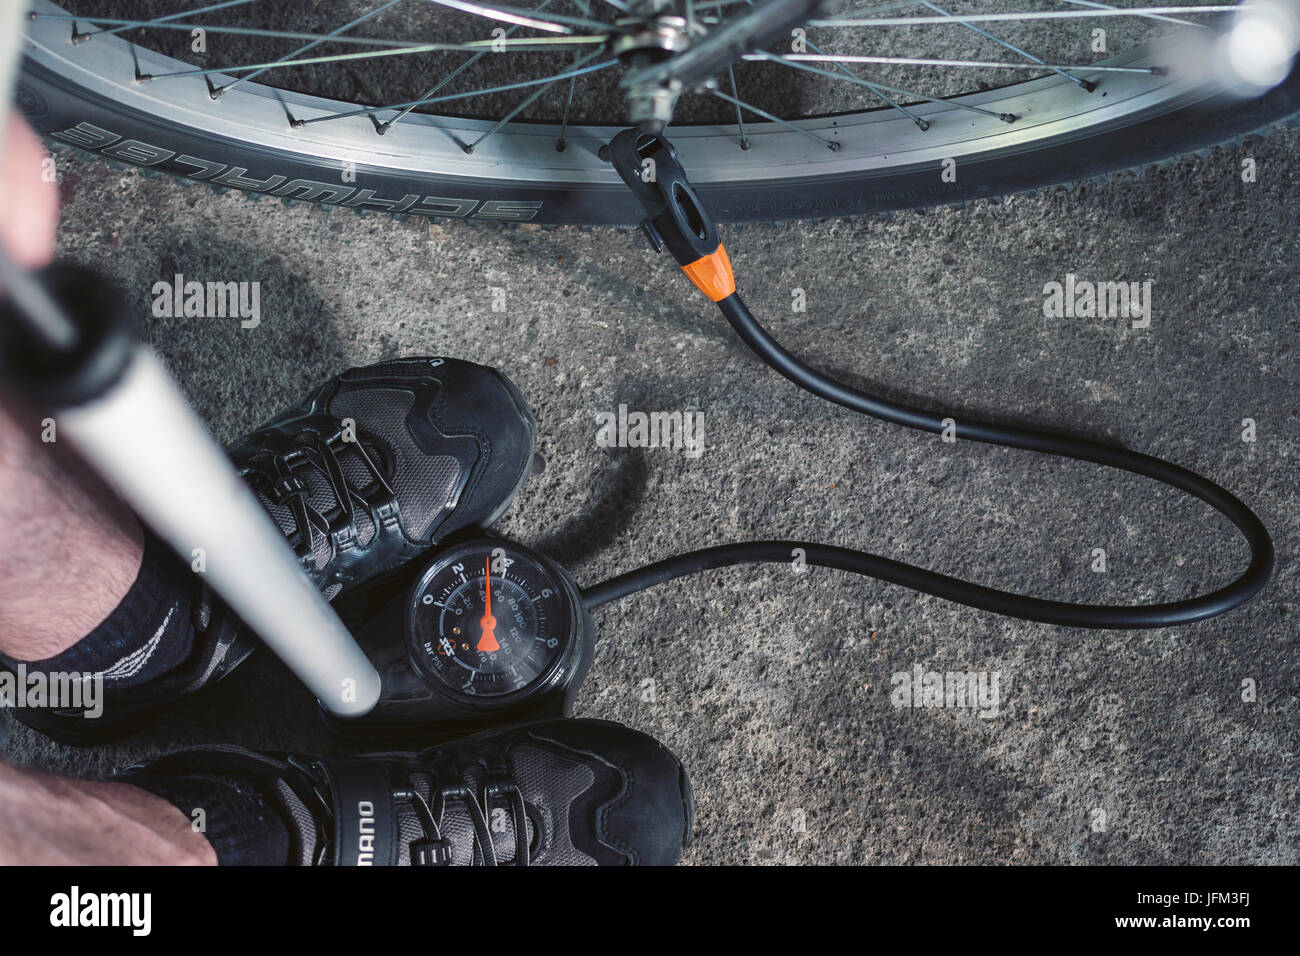 Pumping up the mountain bicycle tire using a track pump Stock Photo